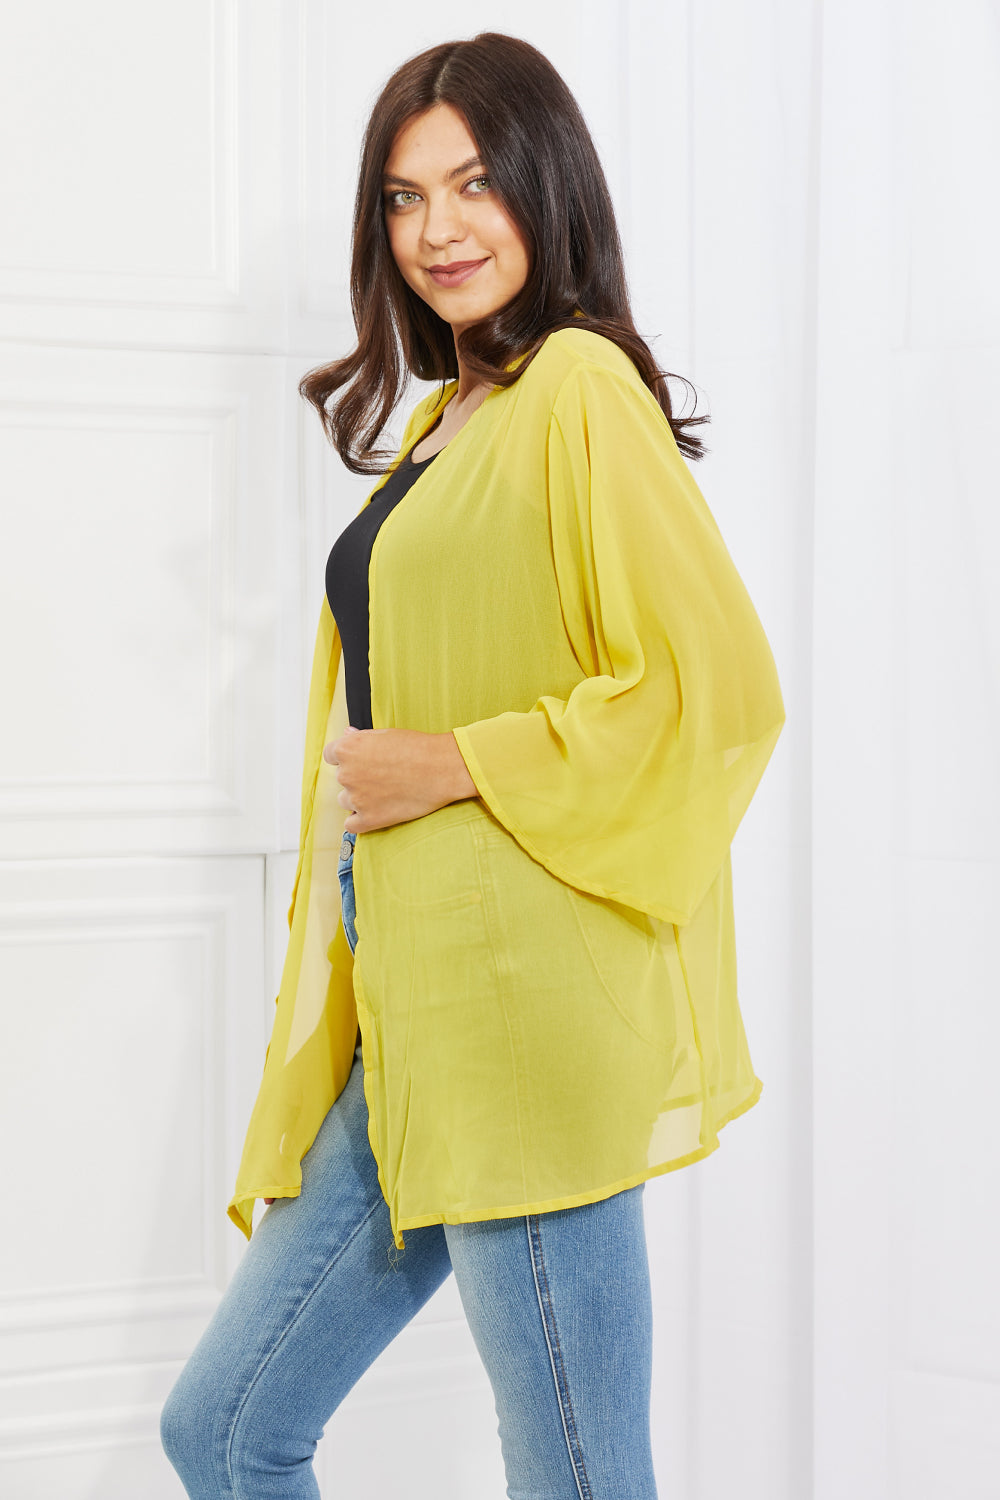 Melody Just Breathe Full Size Chiffon Kimono in Yellow-Cardigans + Kimonos-Inspired by Justeen-Women's Clothing Boutique in Chicago, Illinois